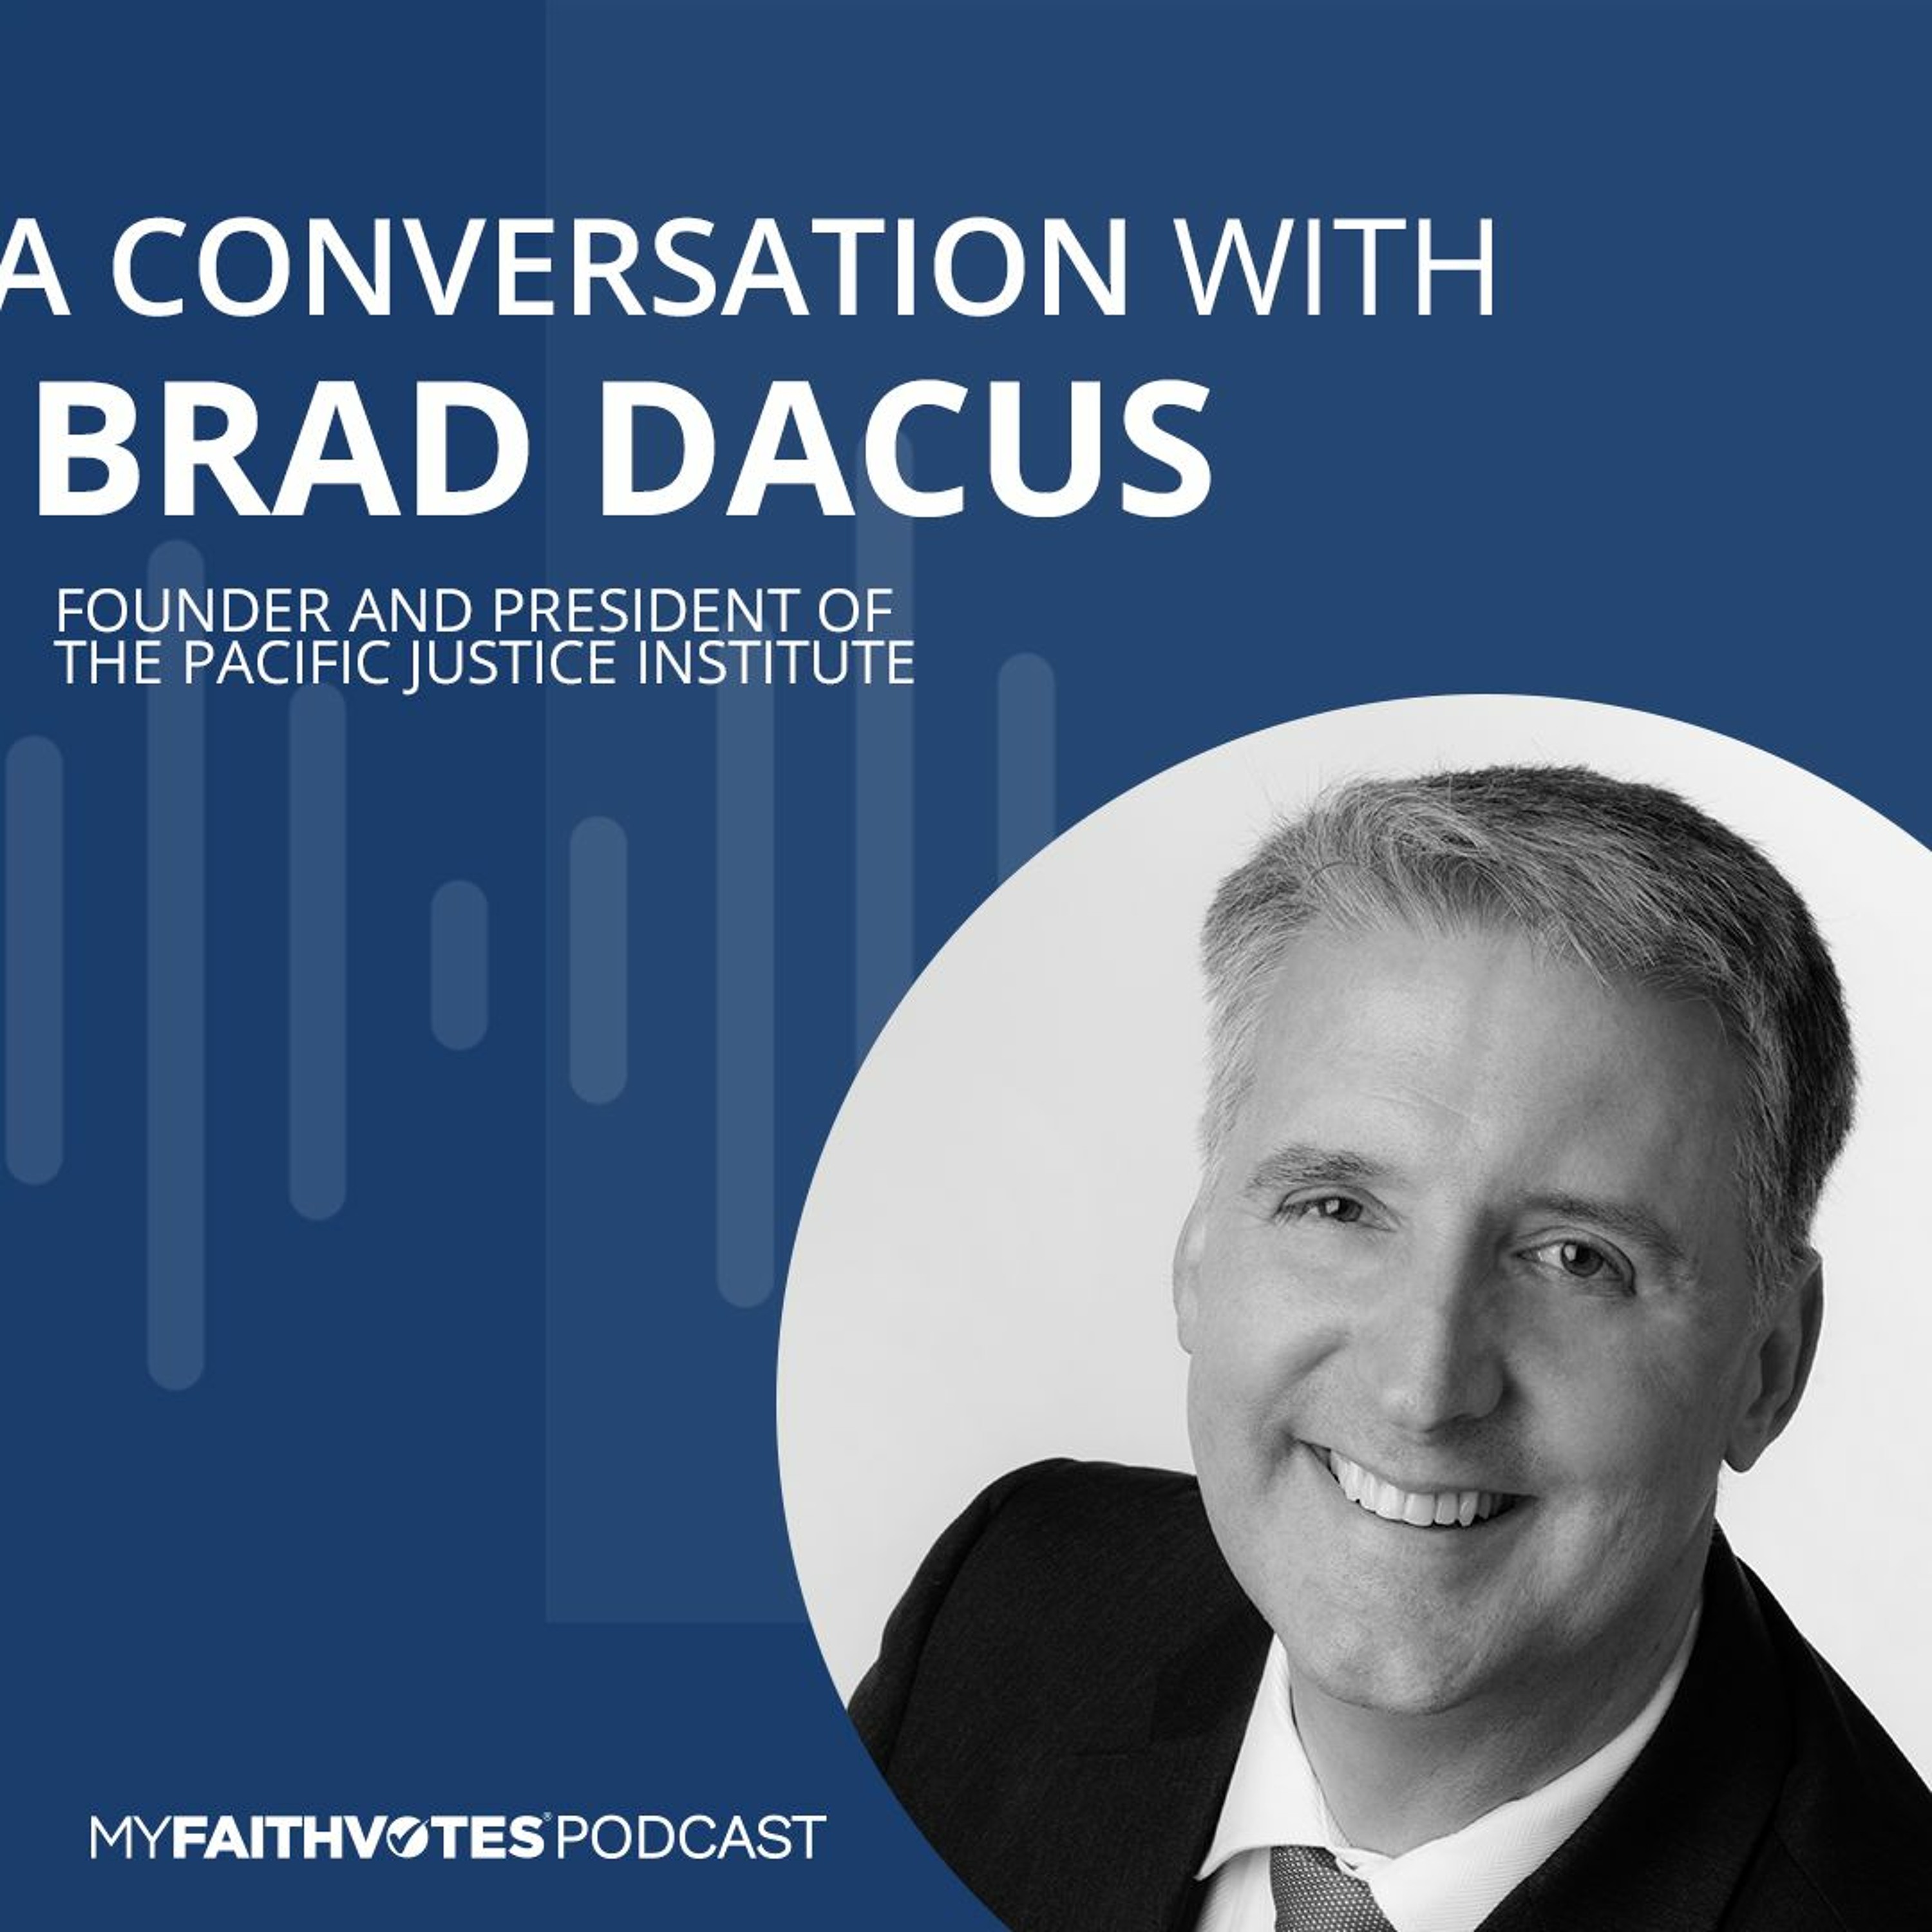 A Conversation with Brad Dacus